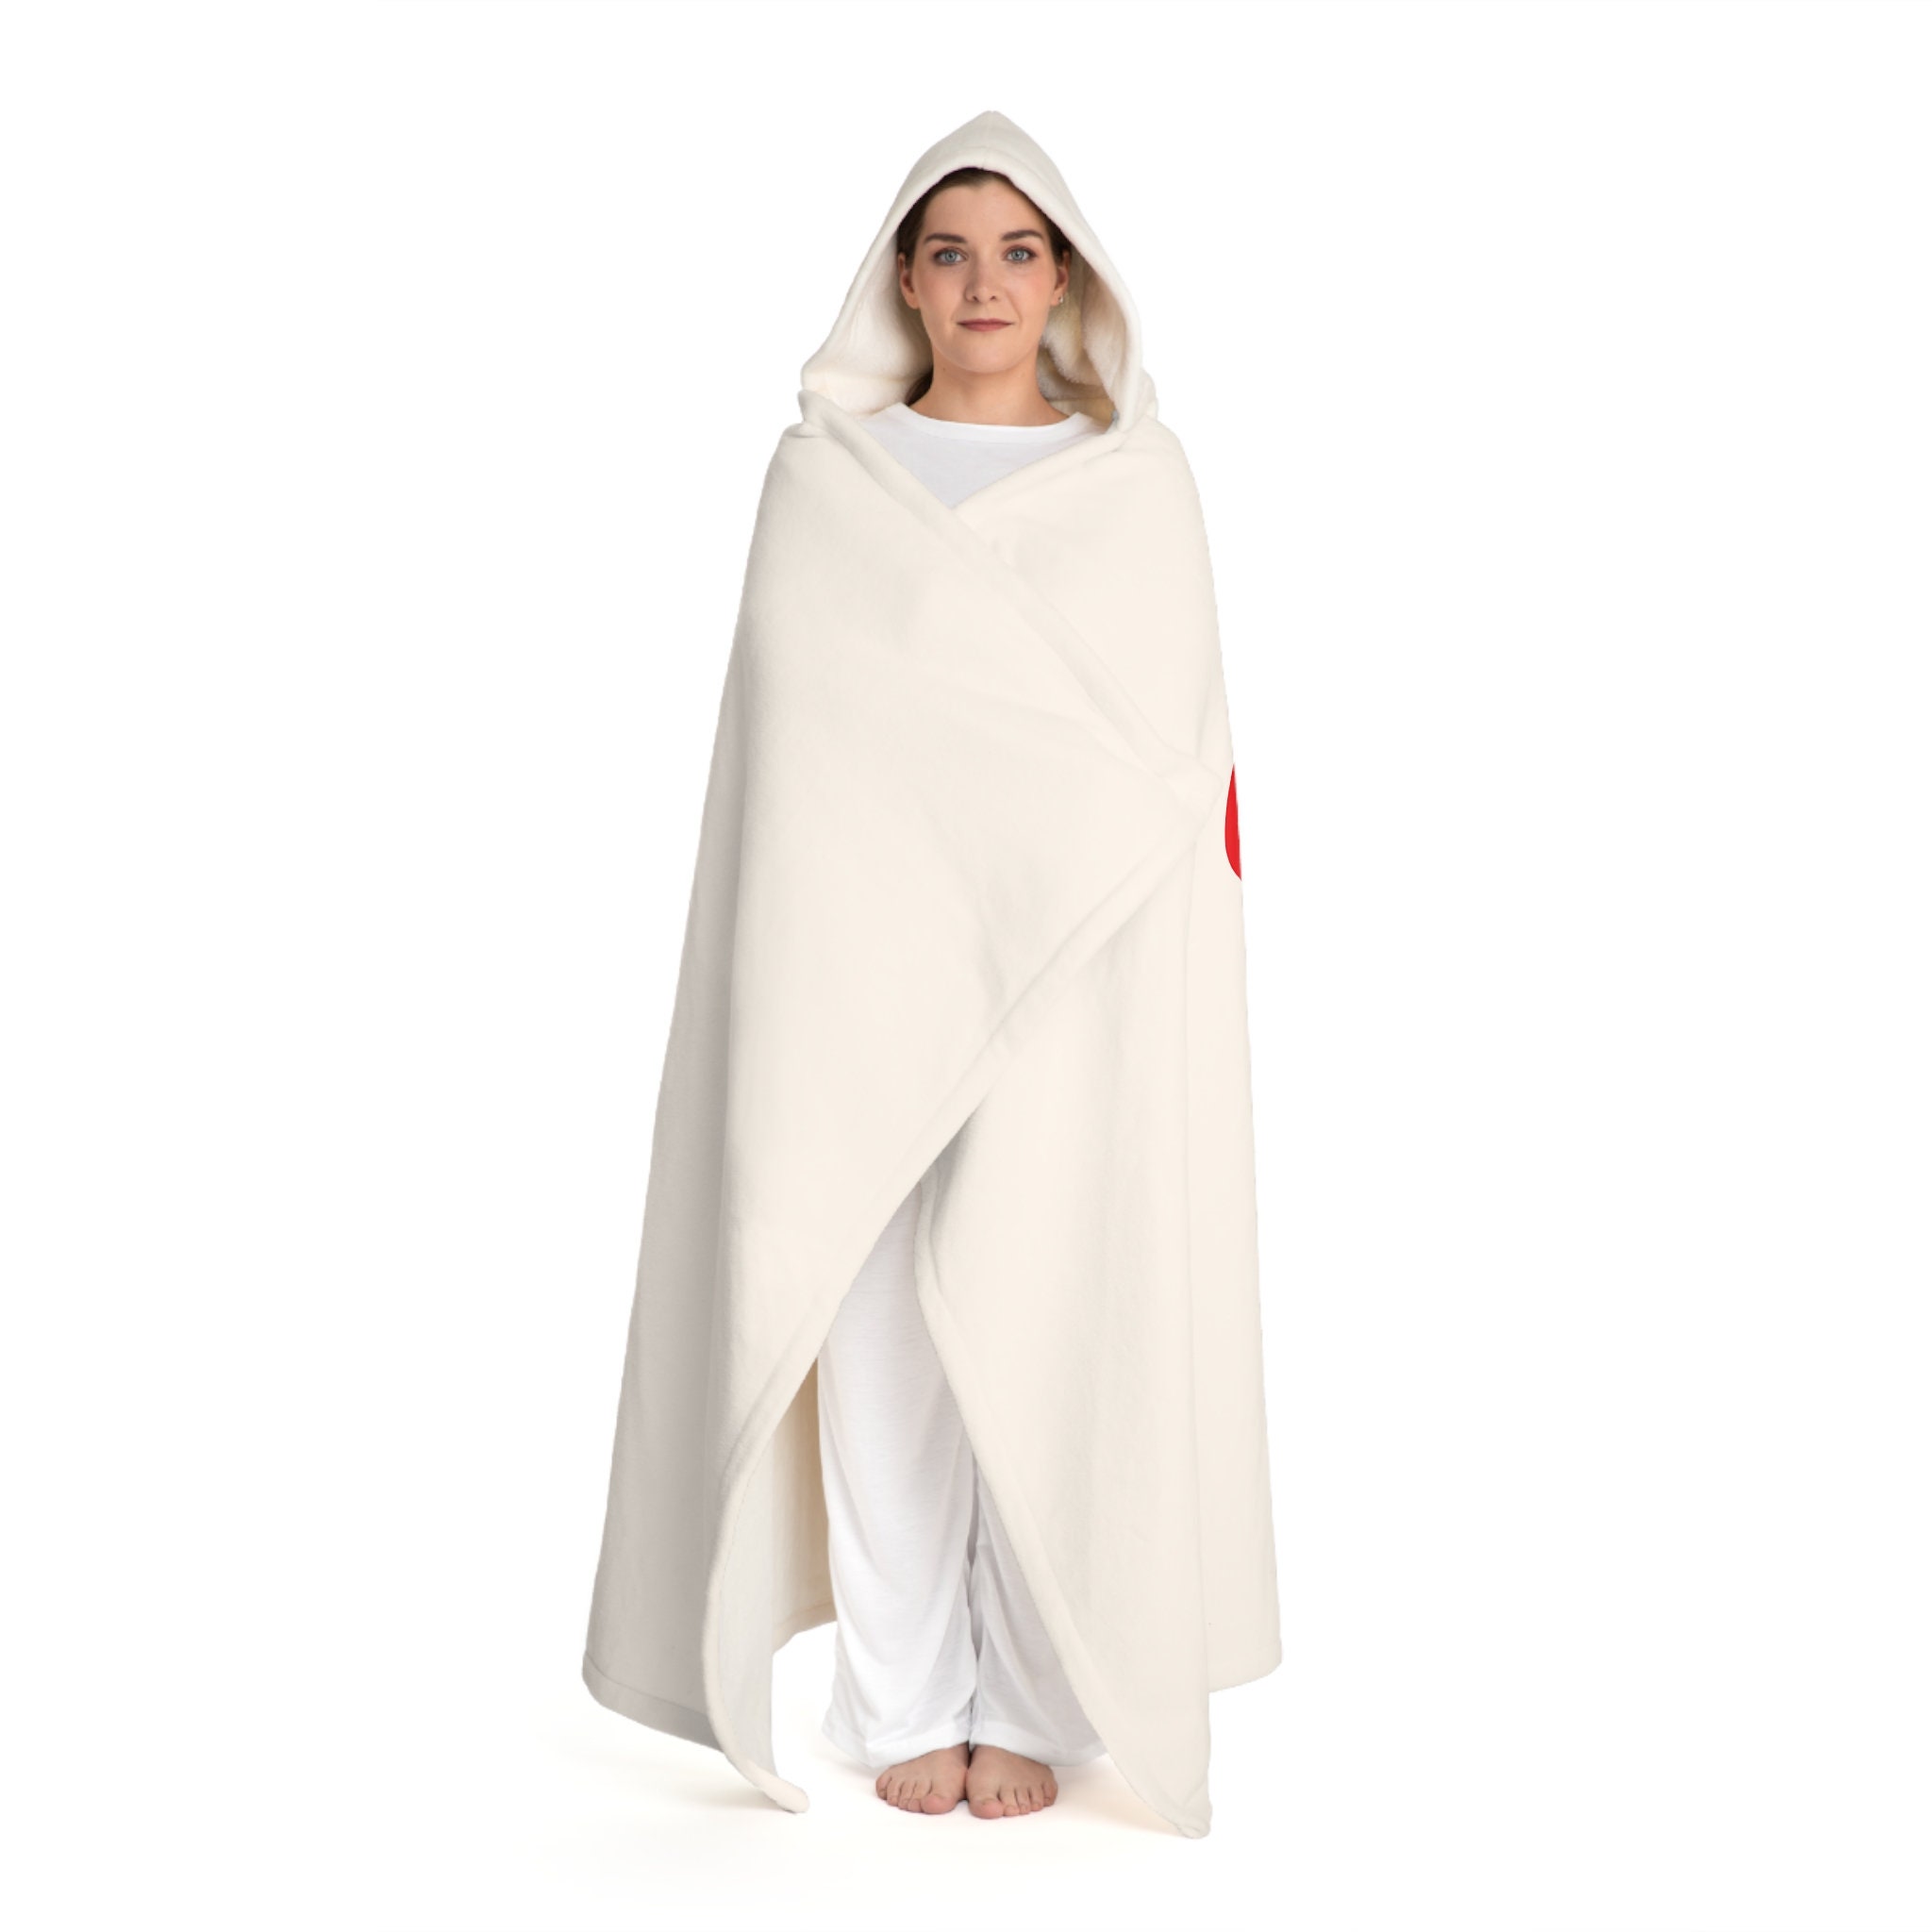 Discover Heart - Super Comfy And Warm Hooded Sherpa Fleece Blanket